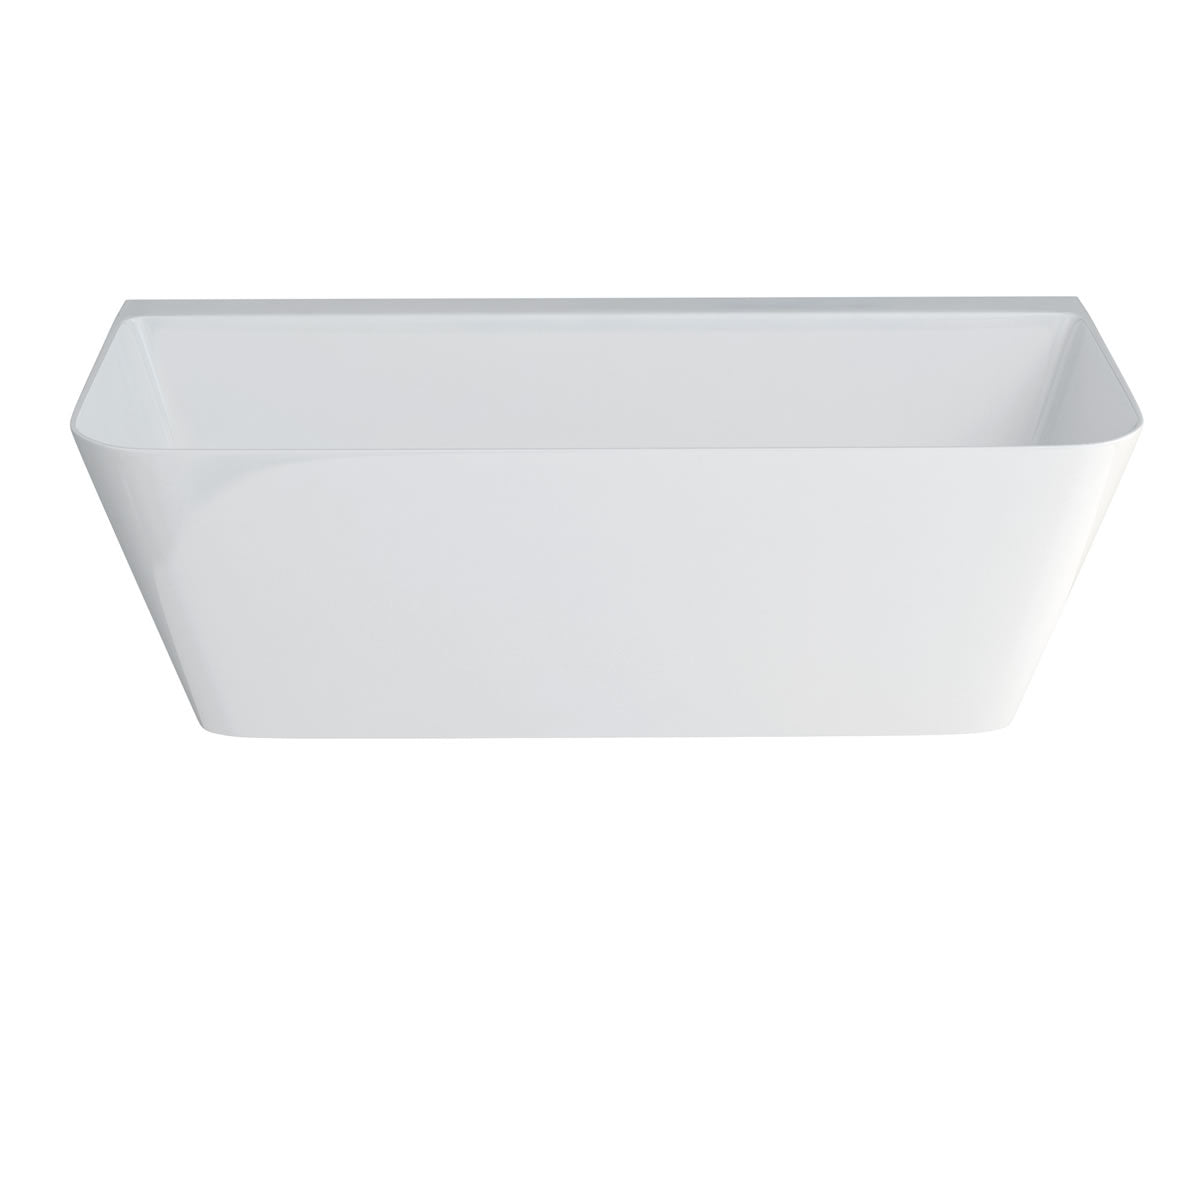 Clearwater Patinato Petite Clearstone Freestanding Bath - 1524 x 750mm